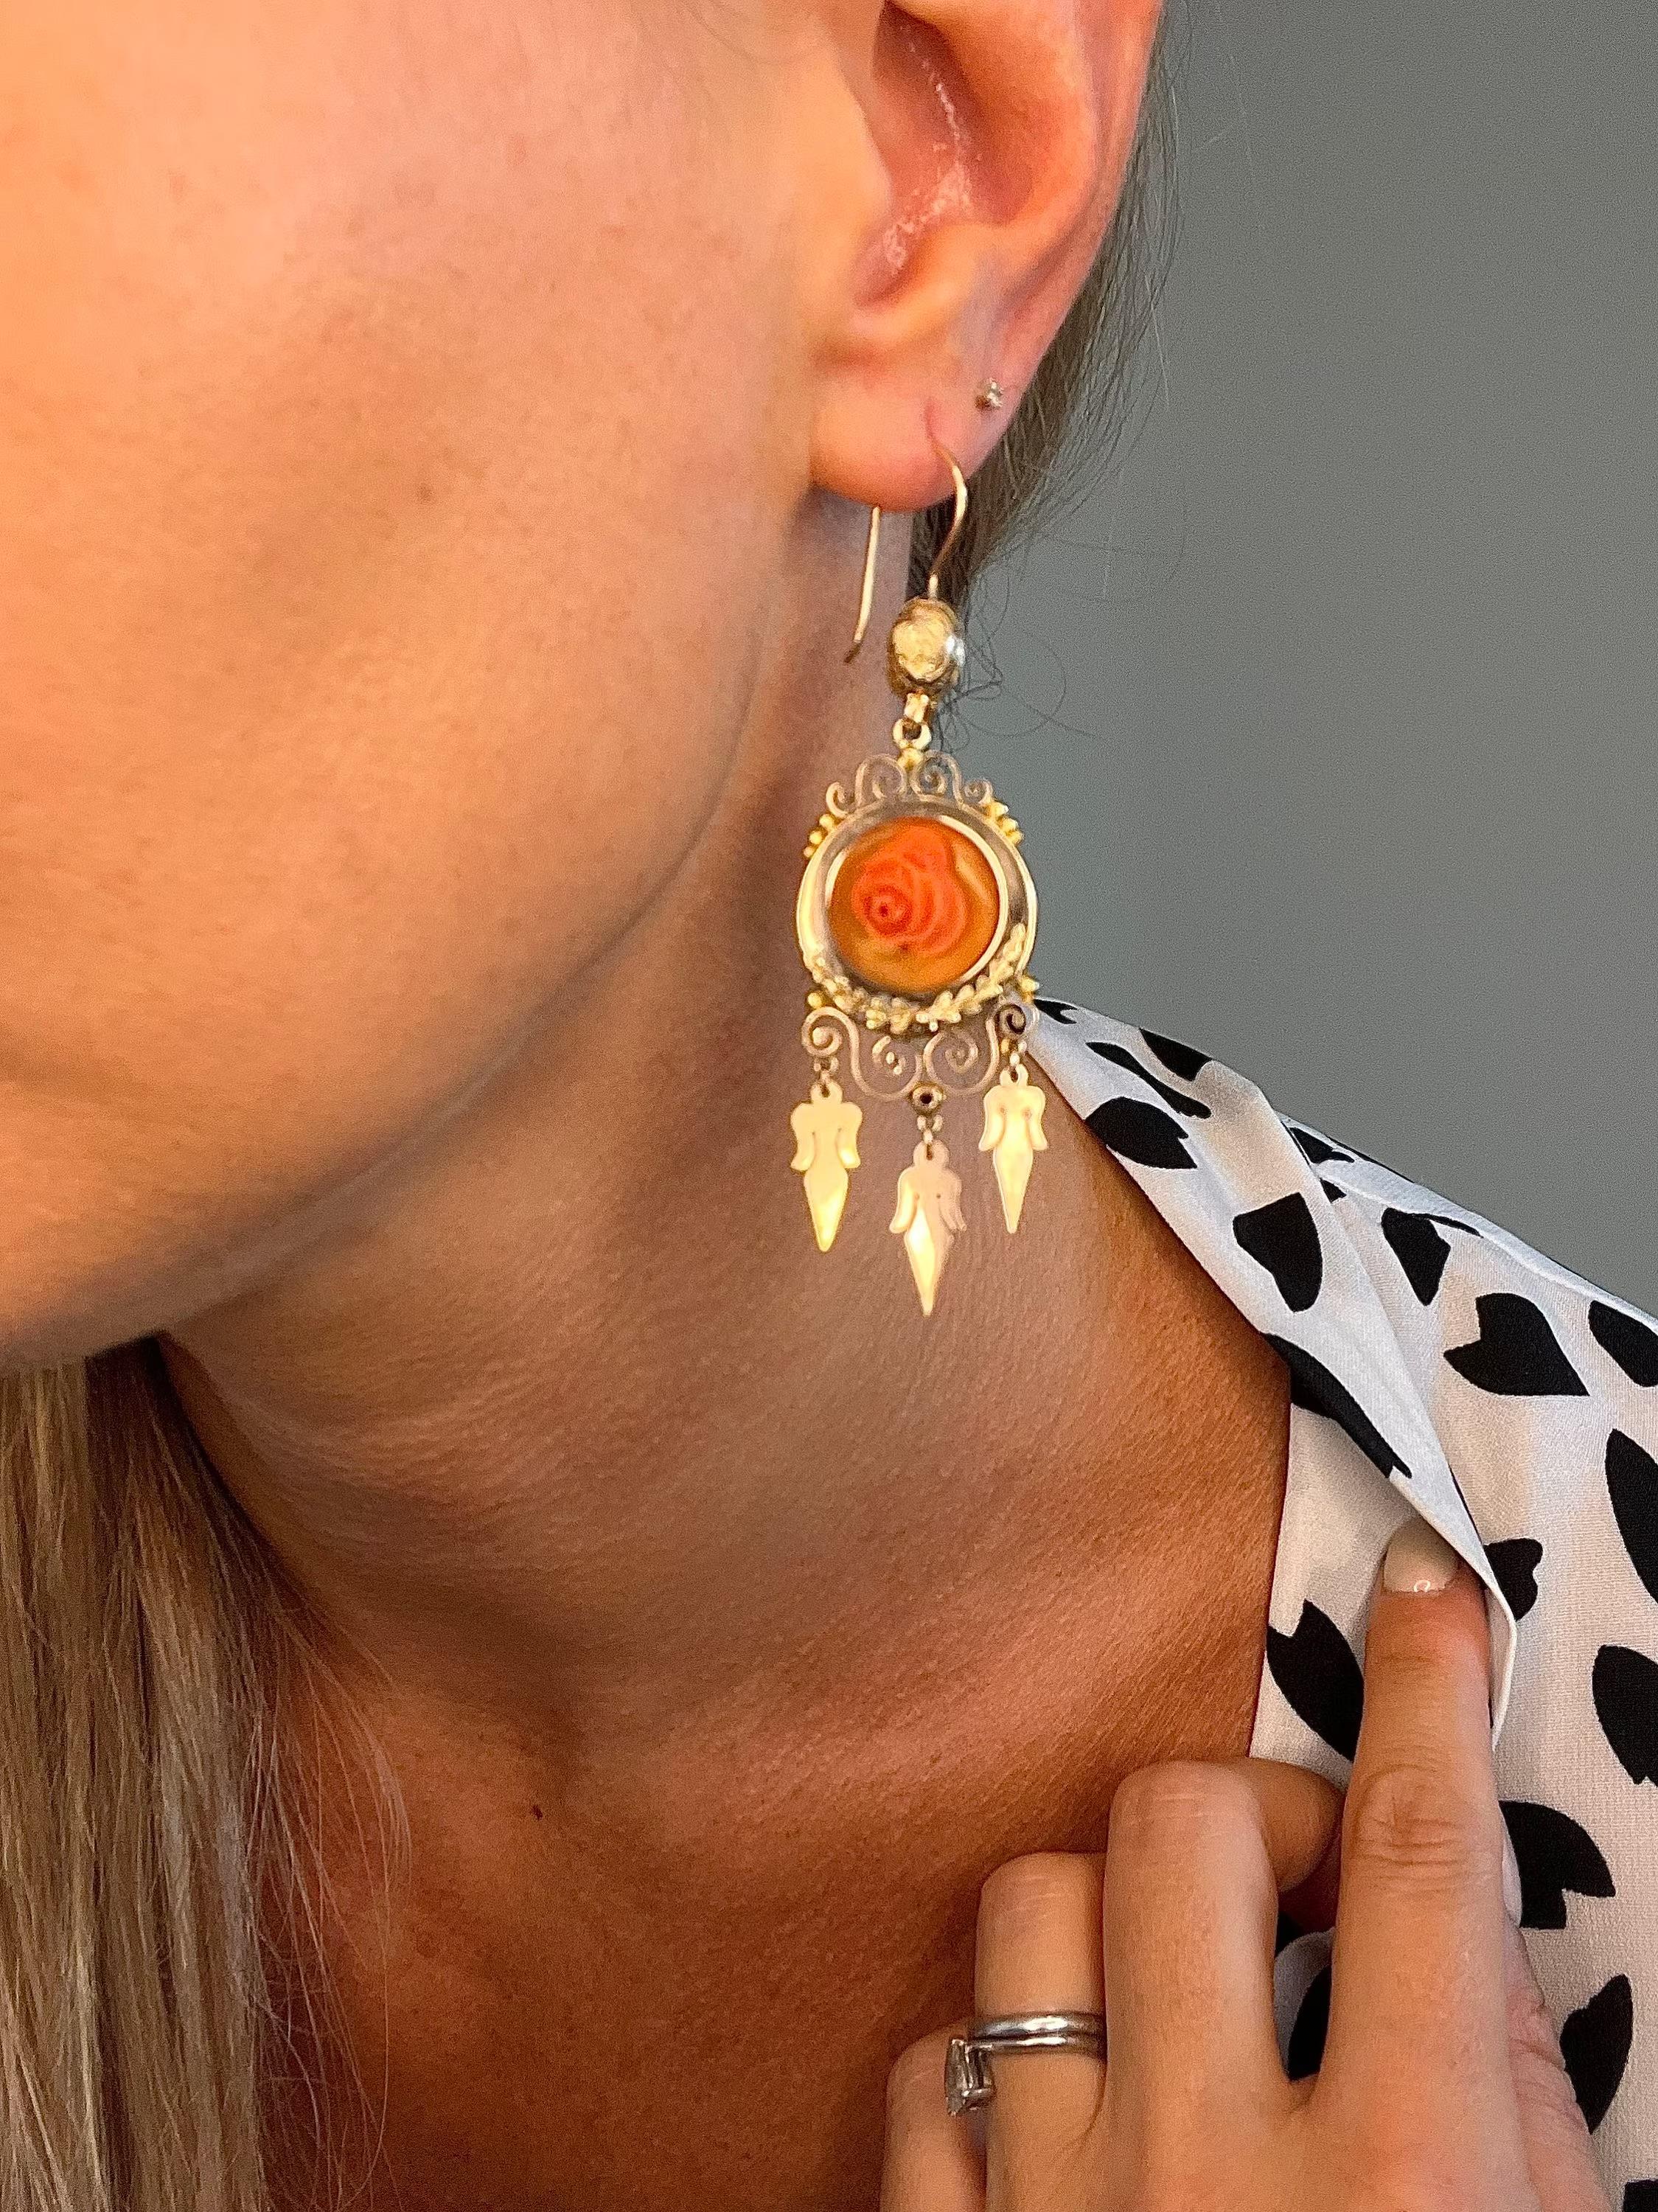 Antique Coral Earrings 

15ct Gold Tested 

Circa 1875

An Absolutely Stunning Pair of Fine Victorian Earrings. Set in Rose Gold, These Beautiful Drop Earrings Are Set with Fabulous, Hand Carved- Coral Rose Centre Pieces. 
Beautifully Decorated with